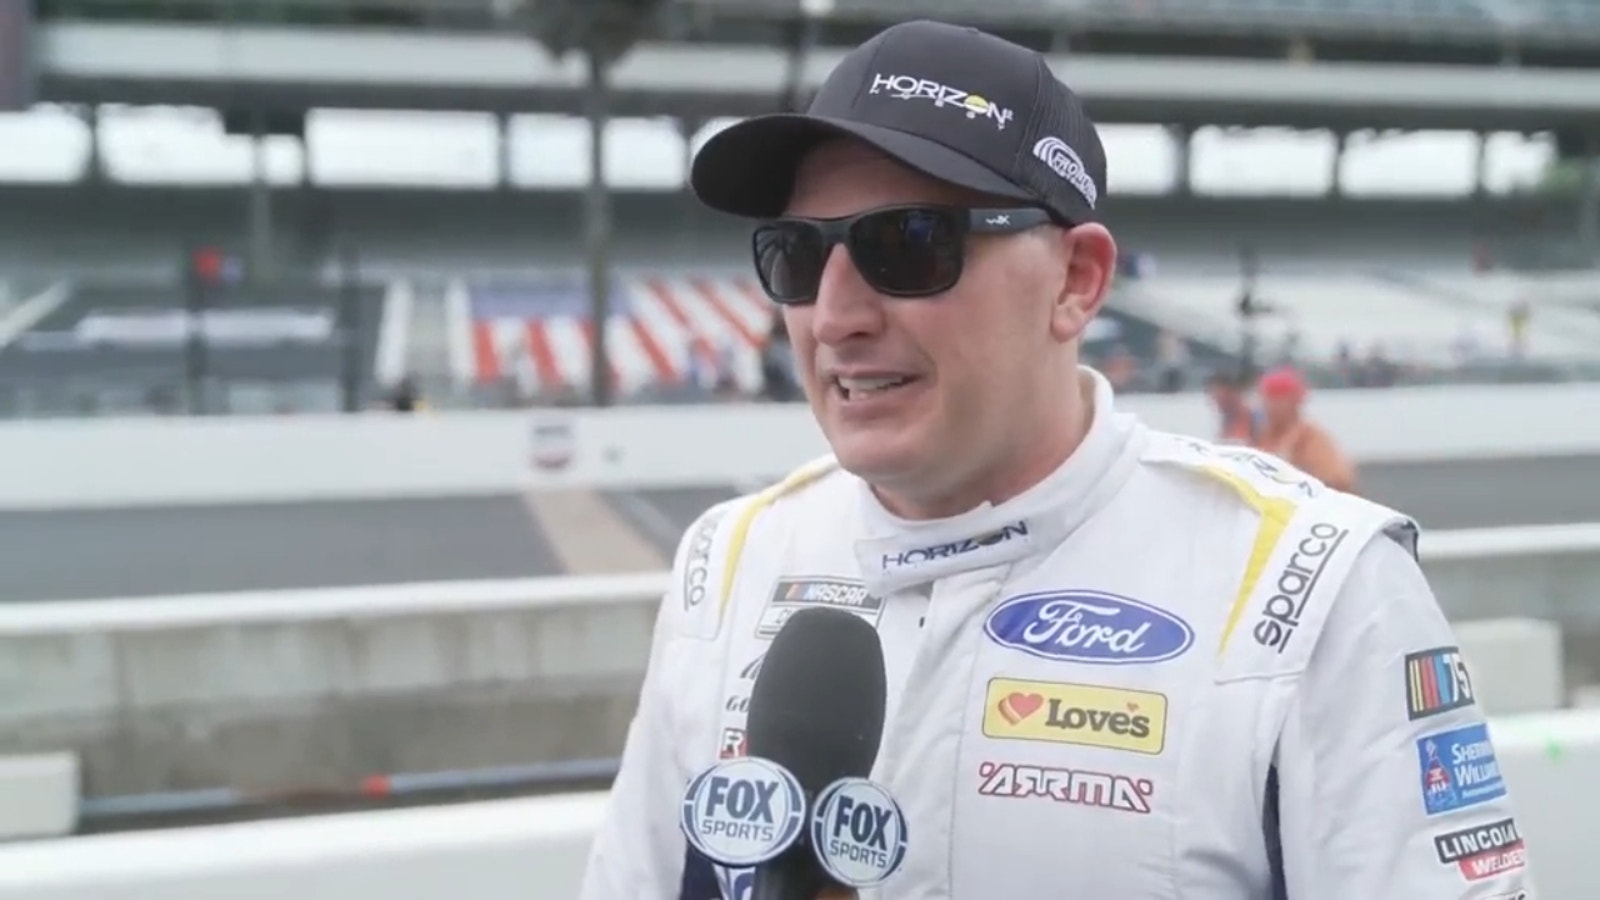 Michael McDowell reflects on his second career win